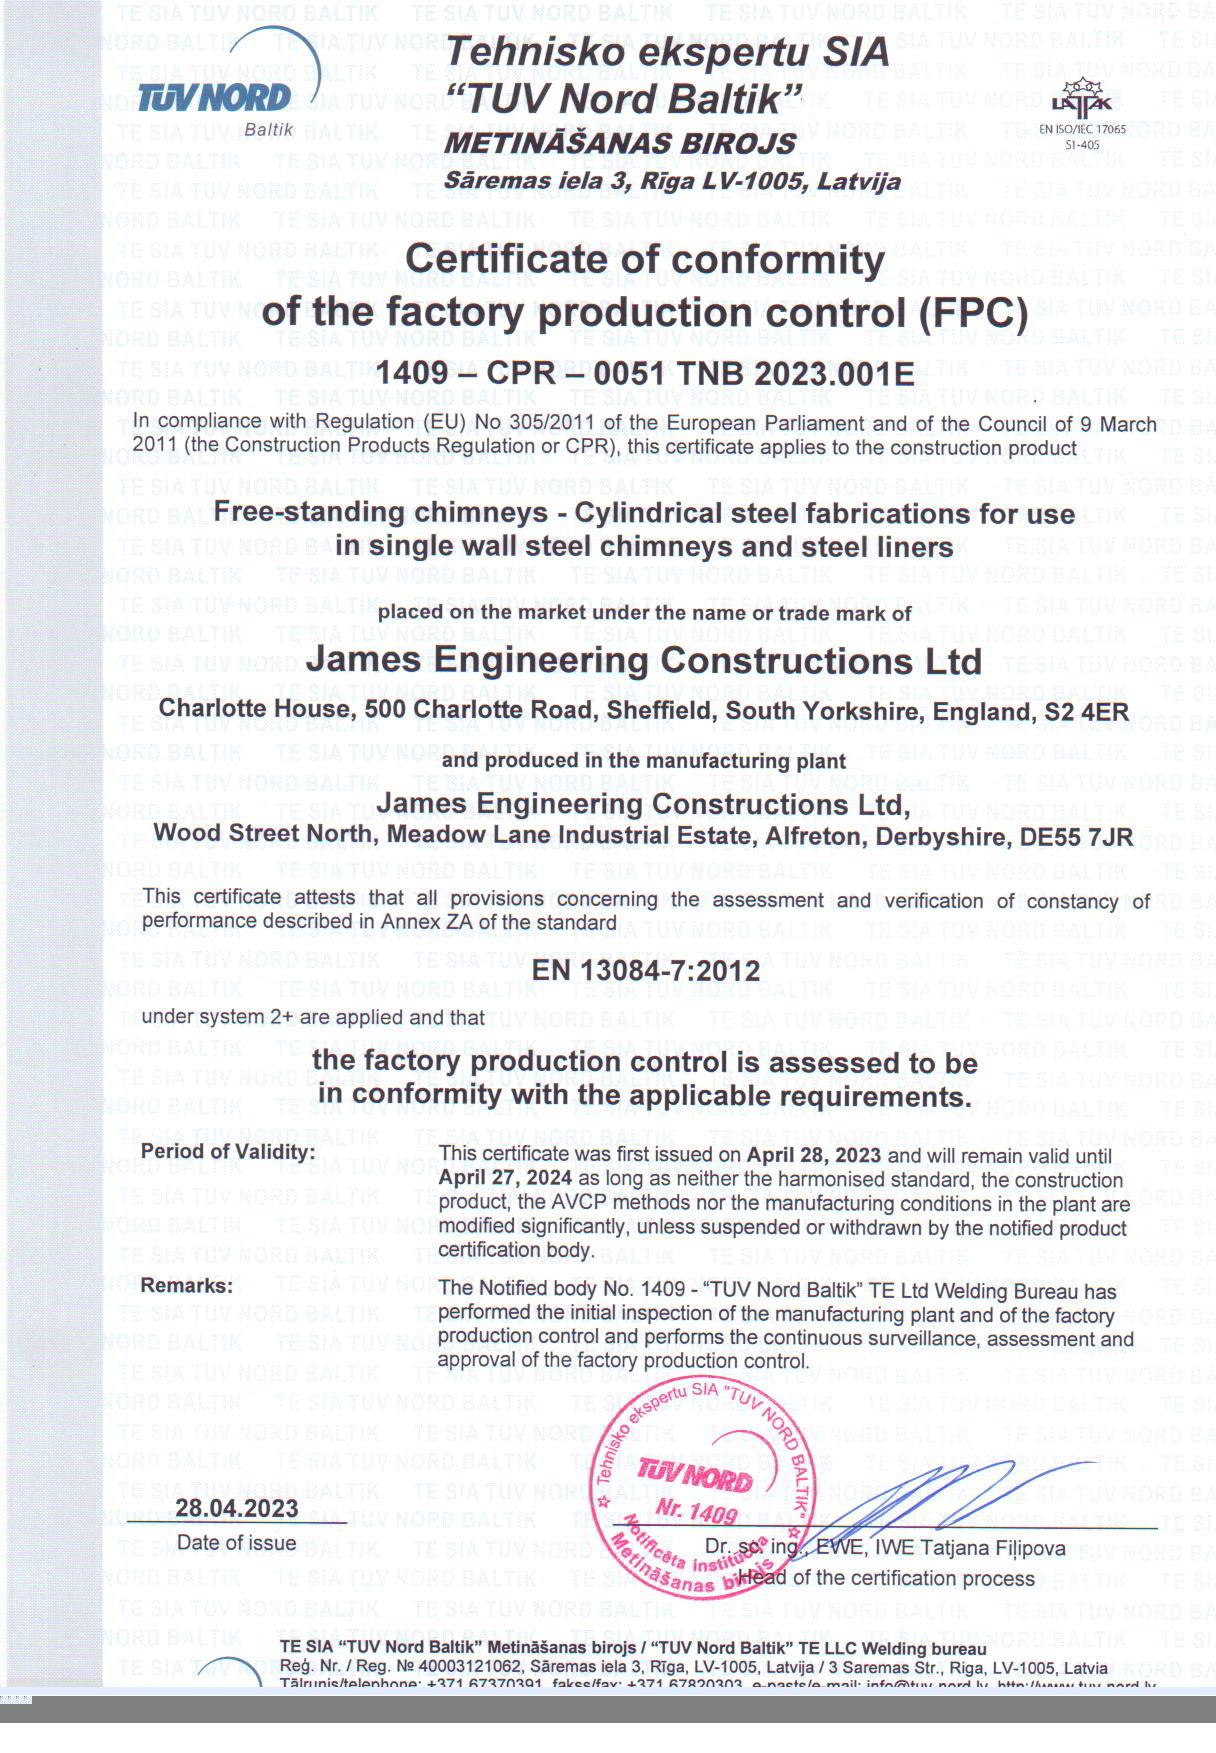 Accredited to EN 13084-7 for Free Standing chimneys